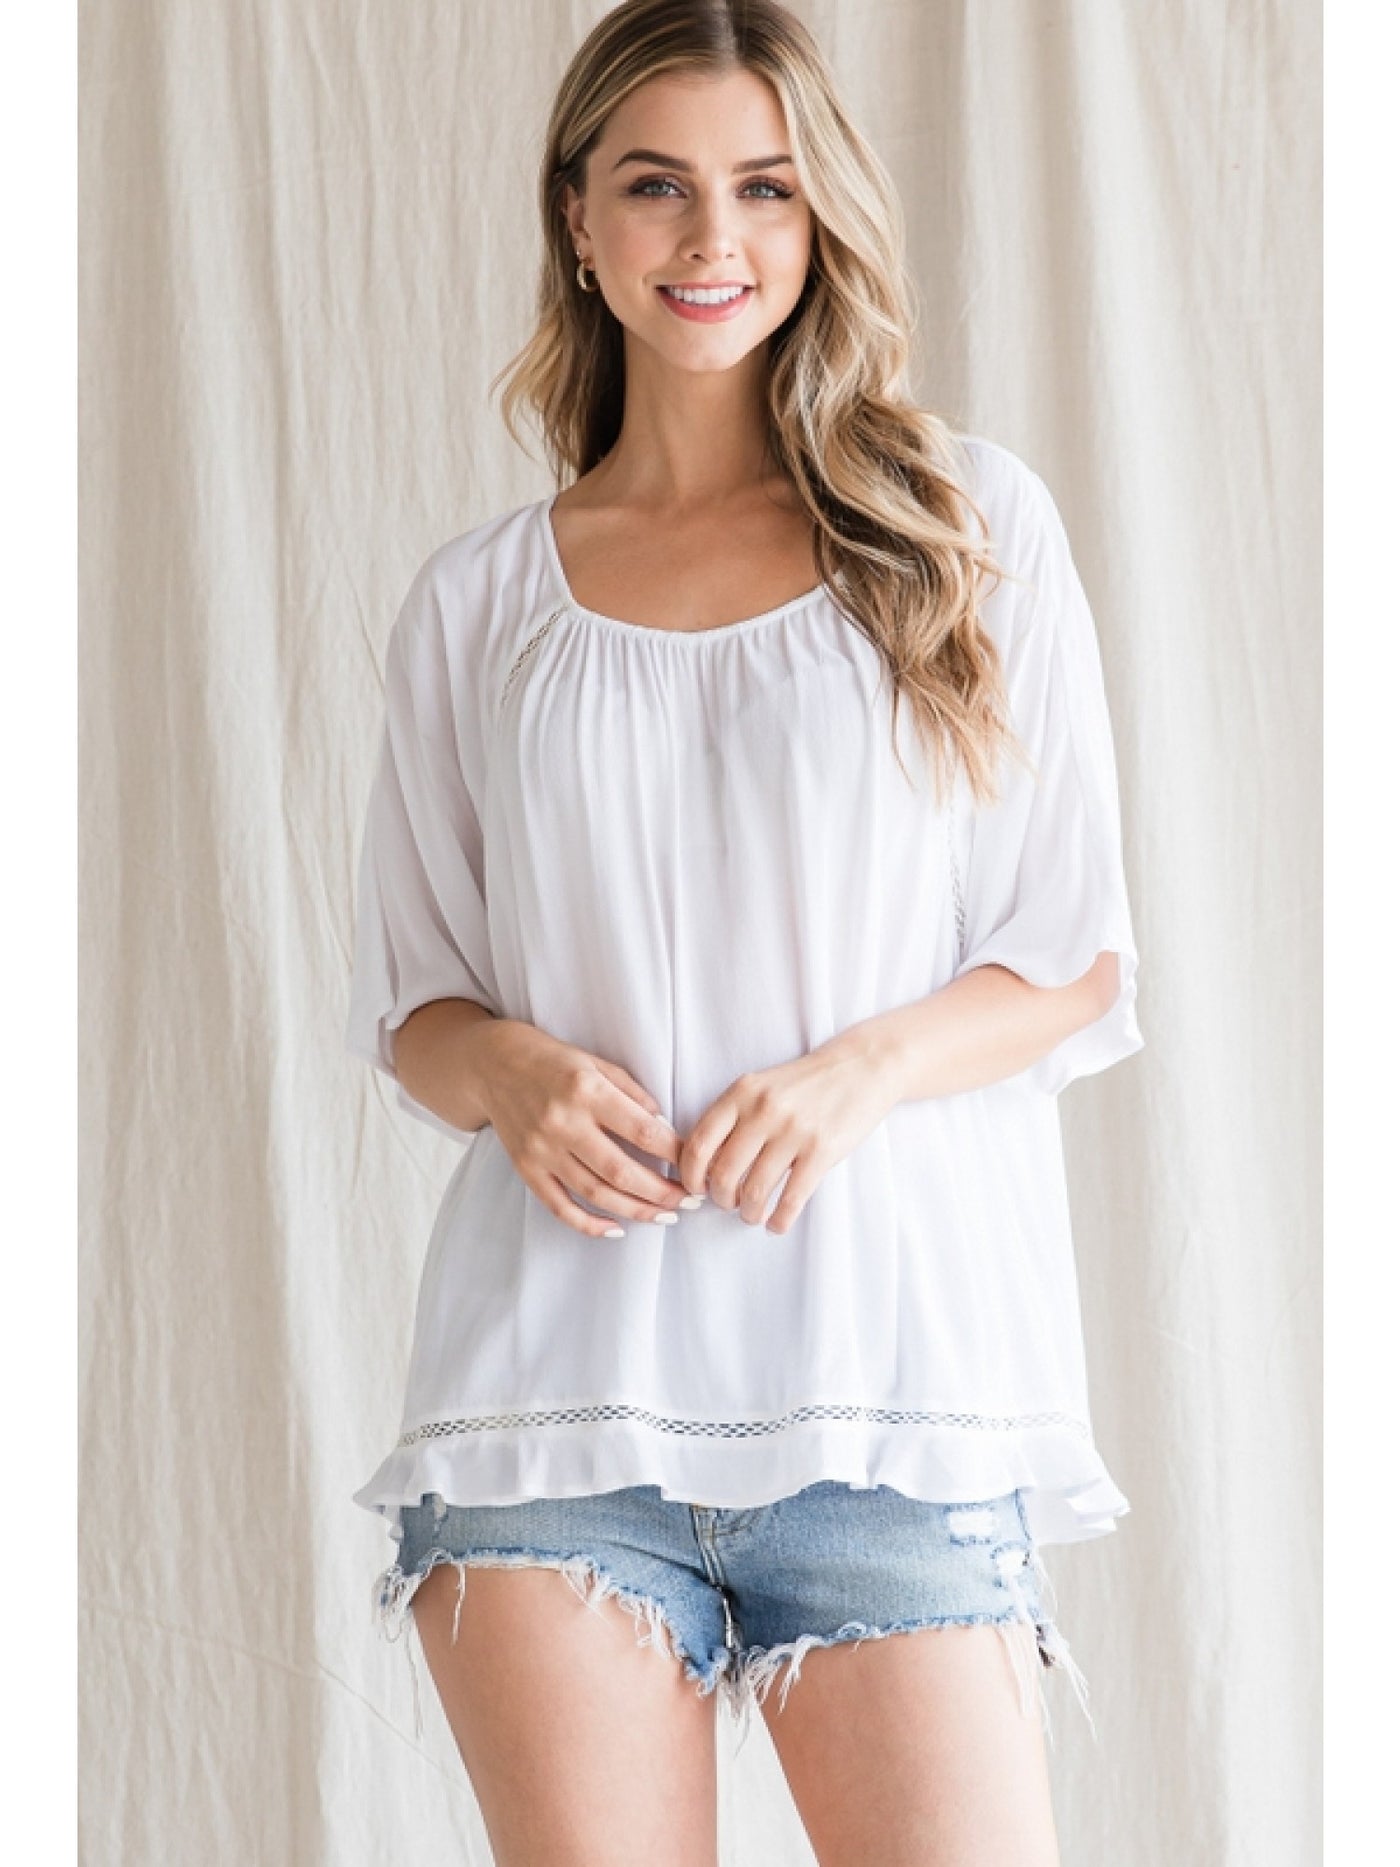 Solid White Top with Half Sleeves